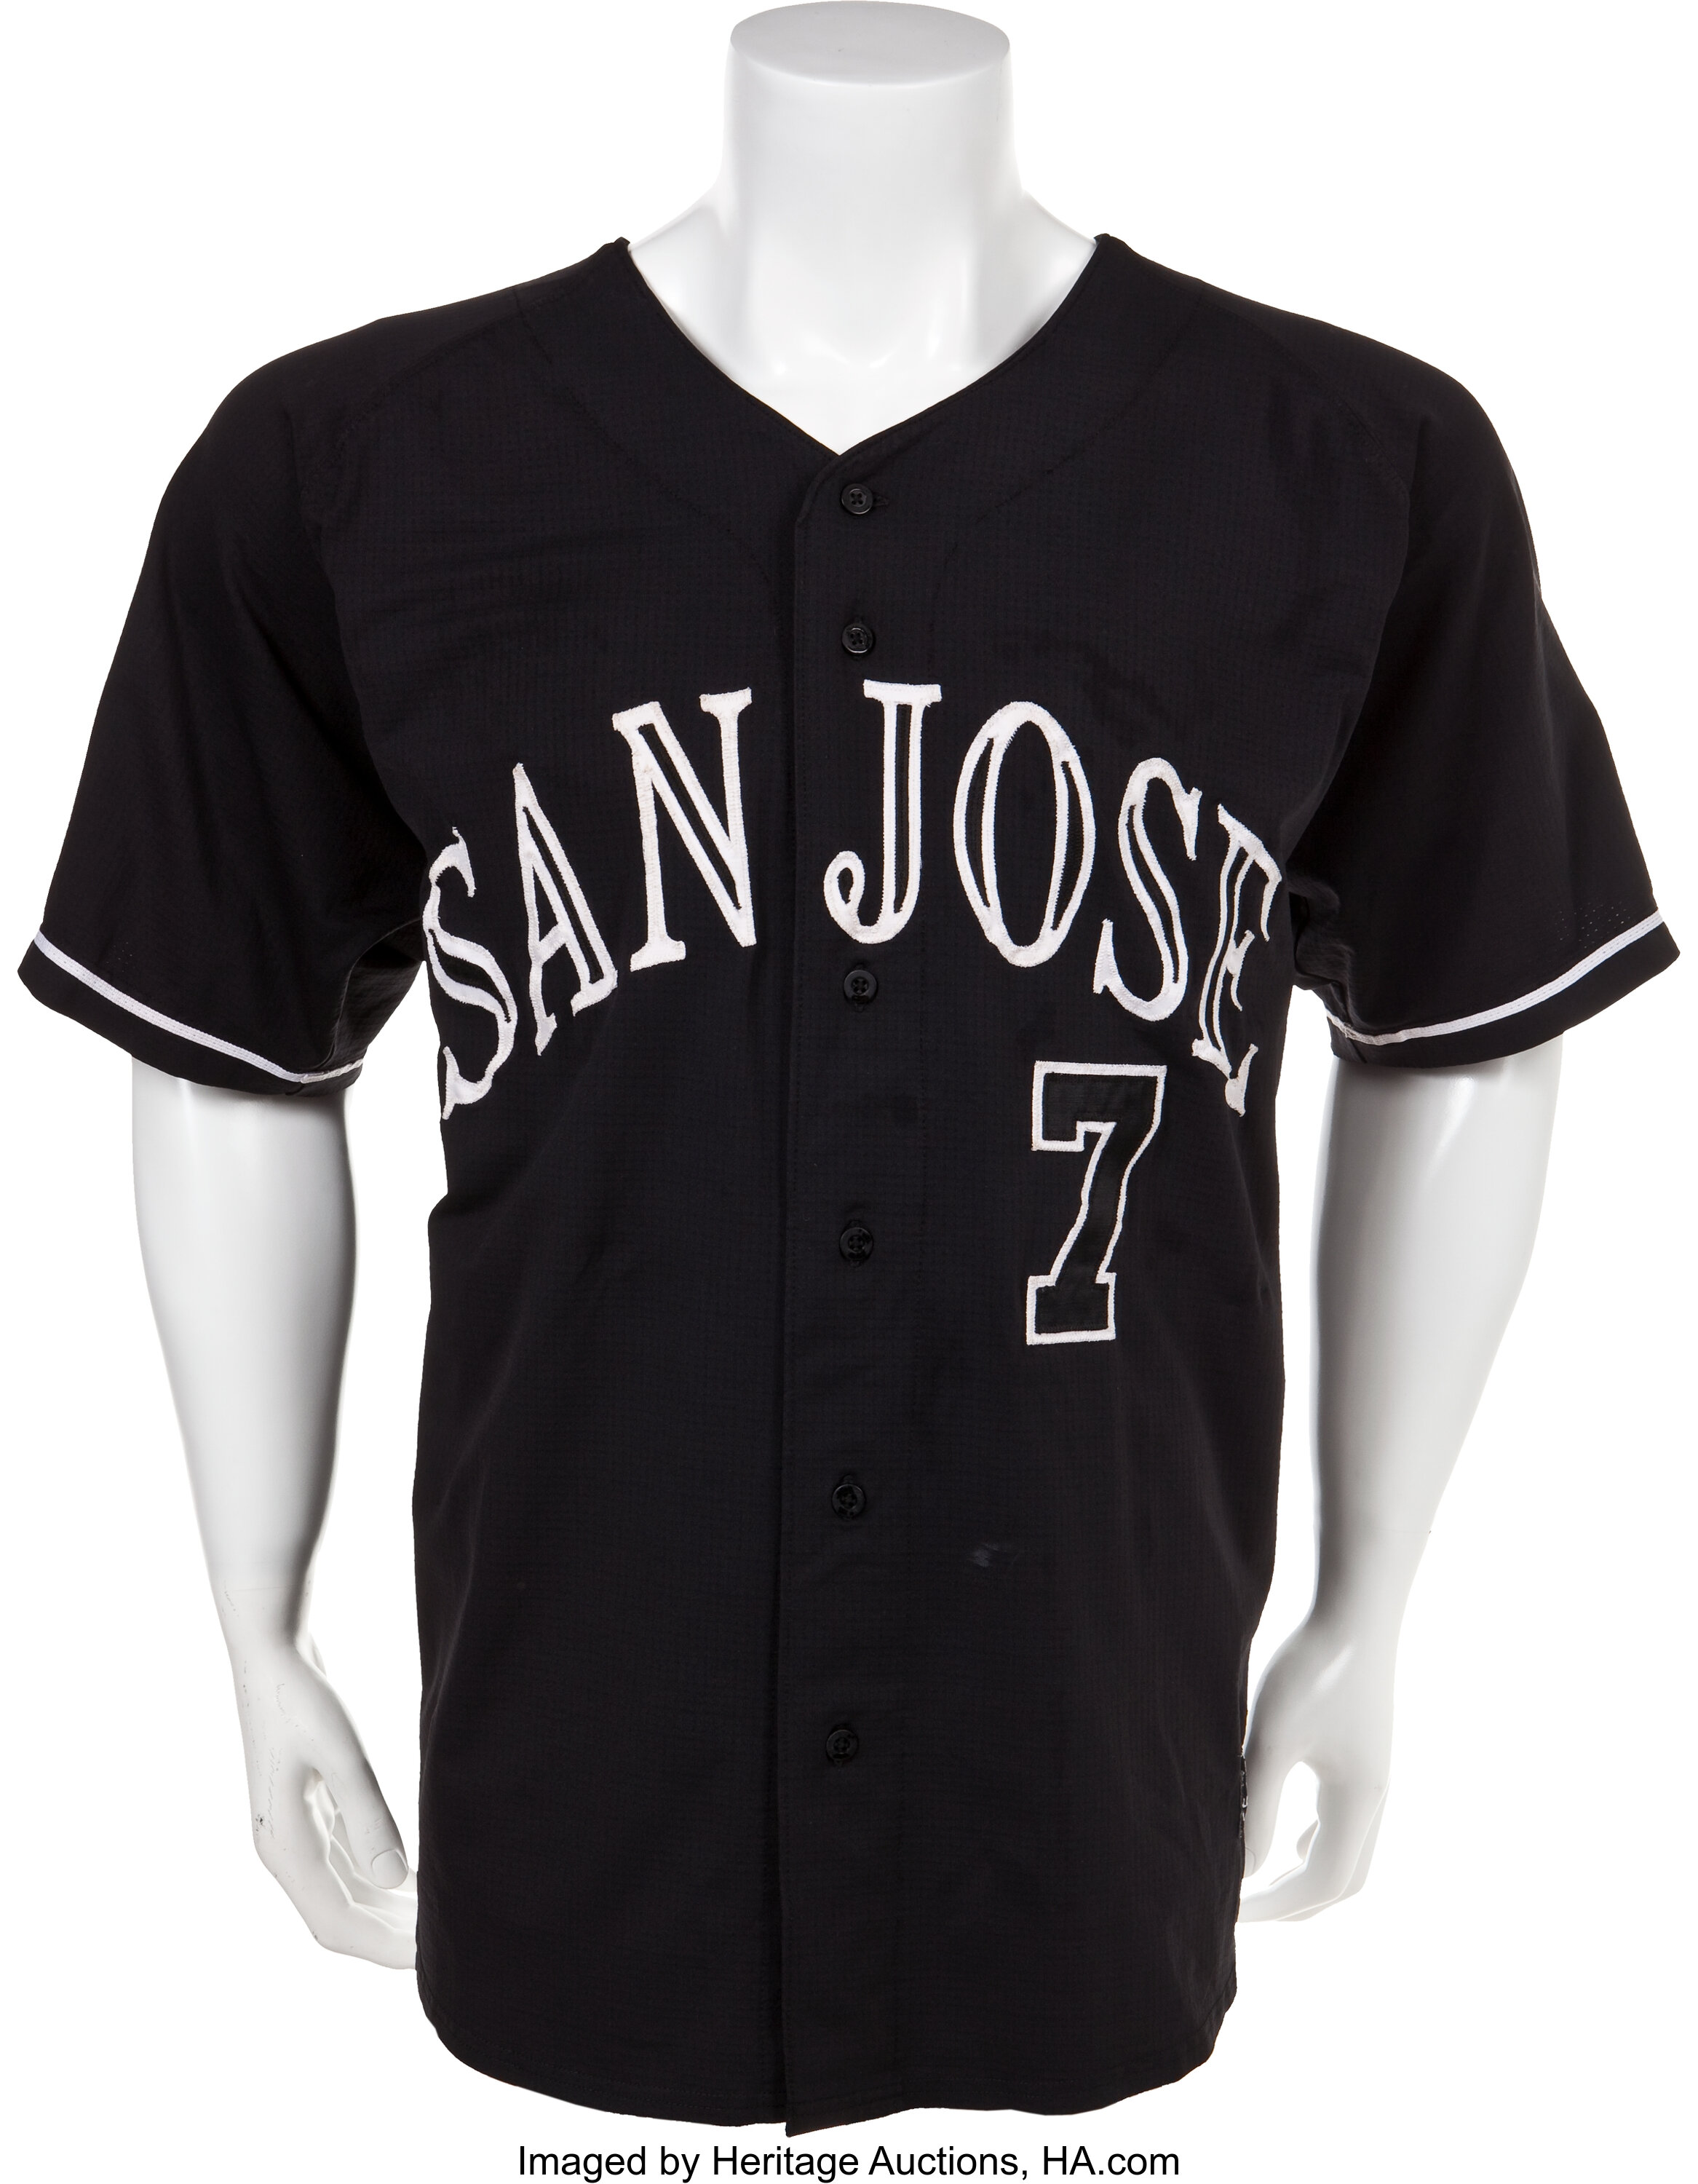 Buster Posey BP28 Foundation - 2021 Game Used Road Jersey worn by